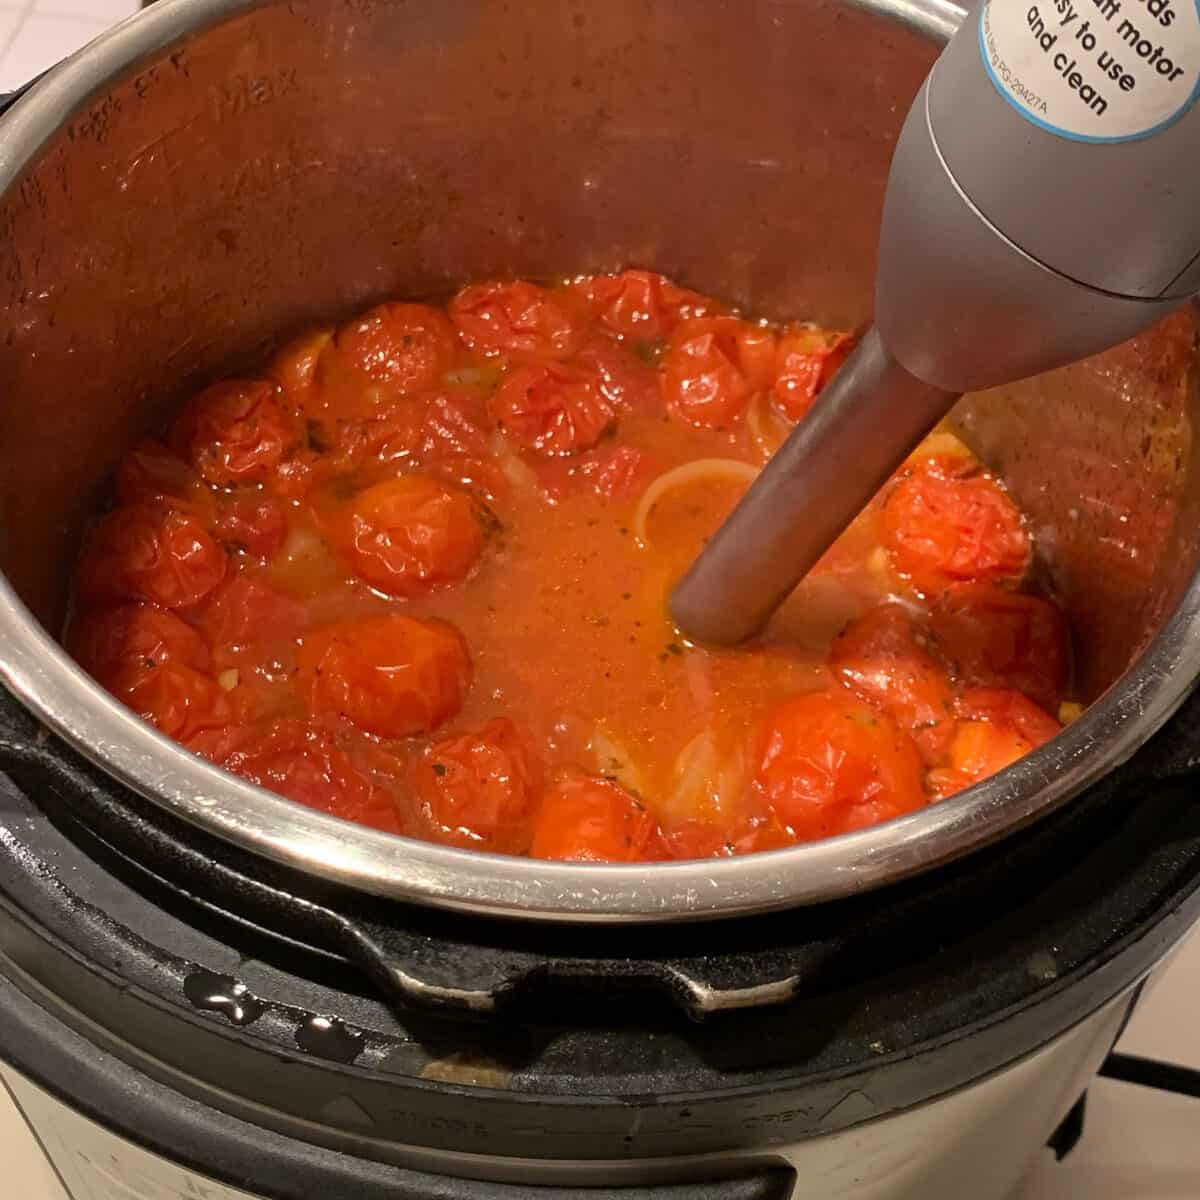 immersion blender in tomato soup